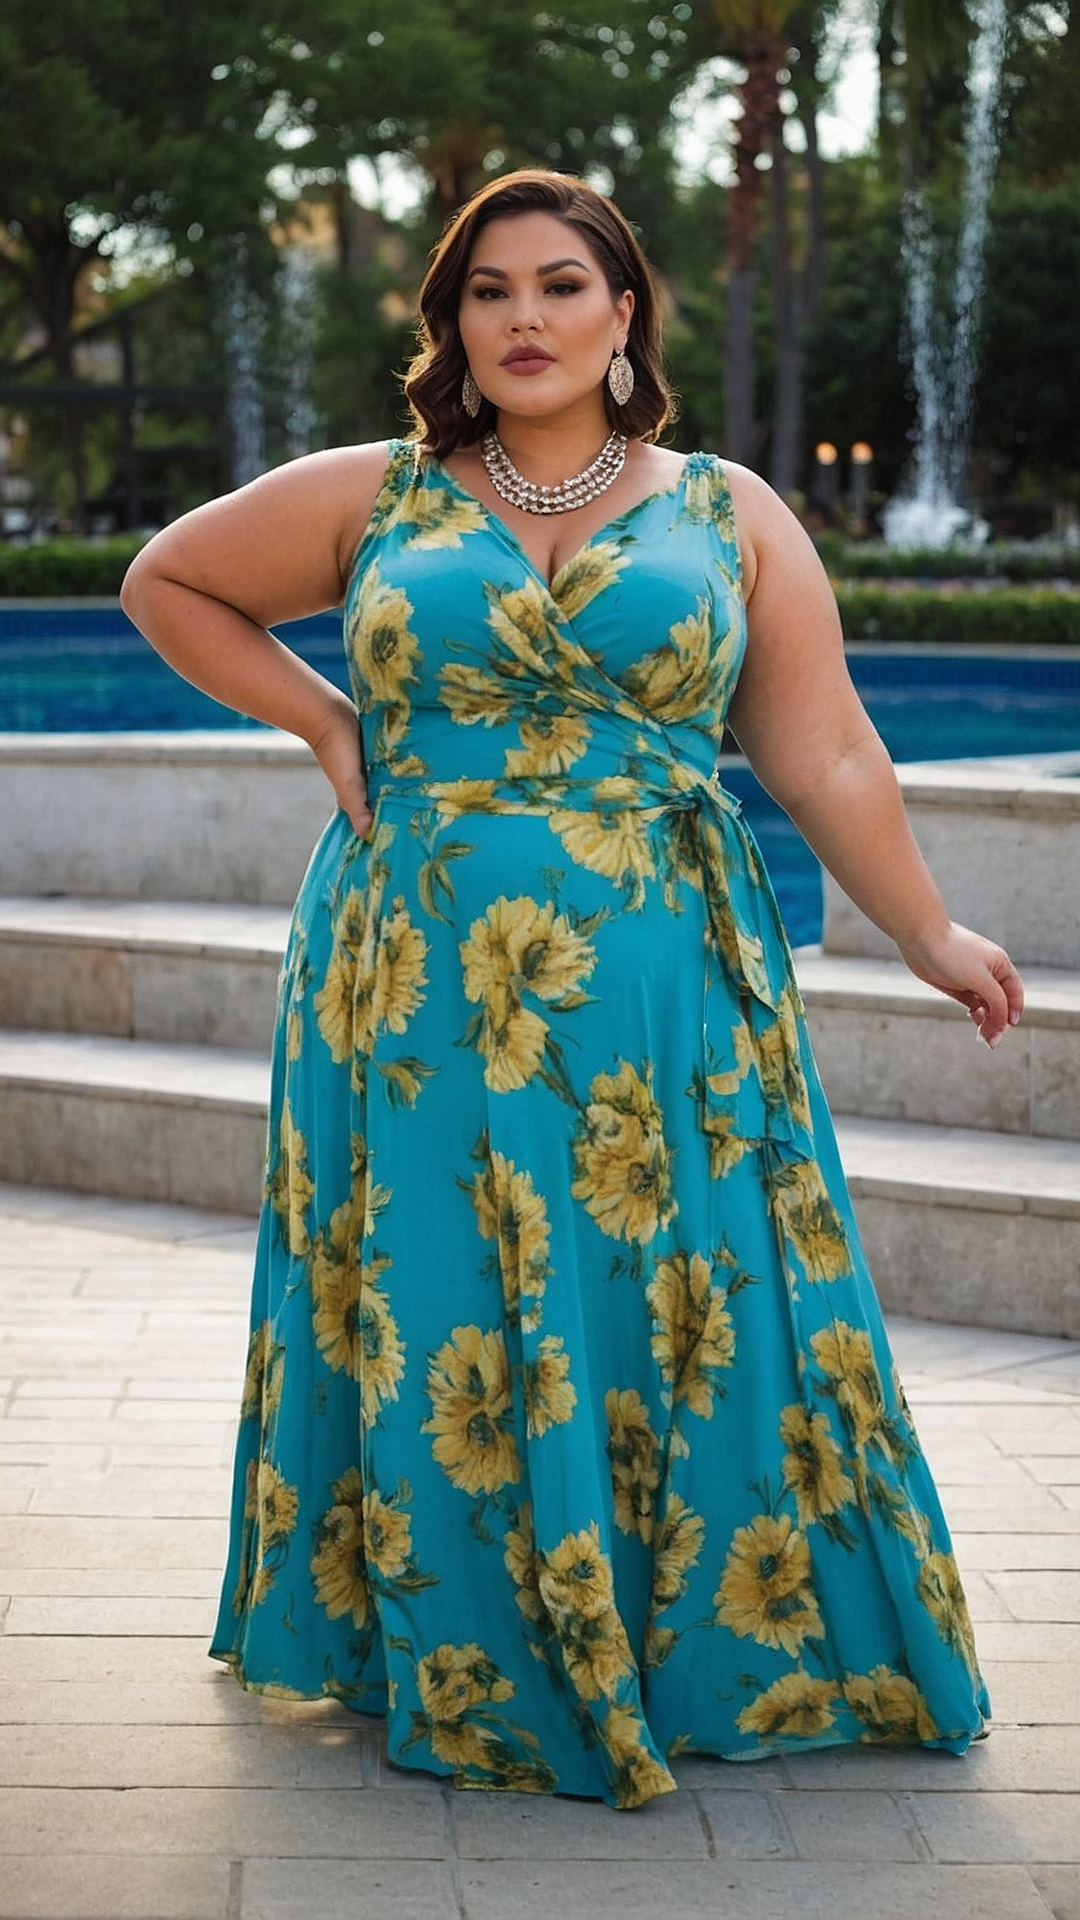 Playful Plus Size Poolside Outfits for Summer